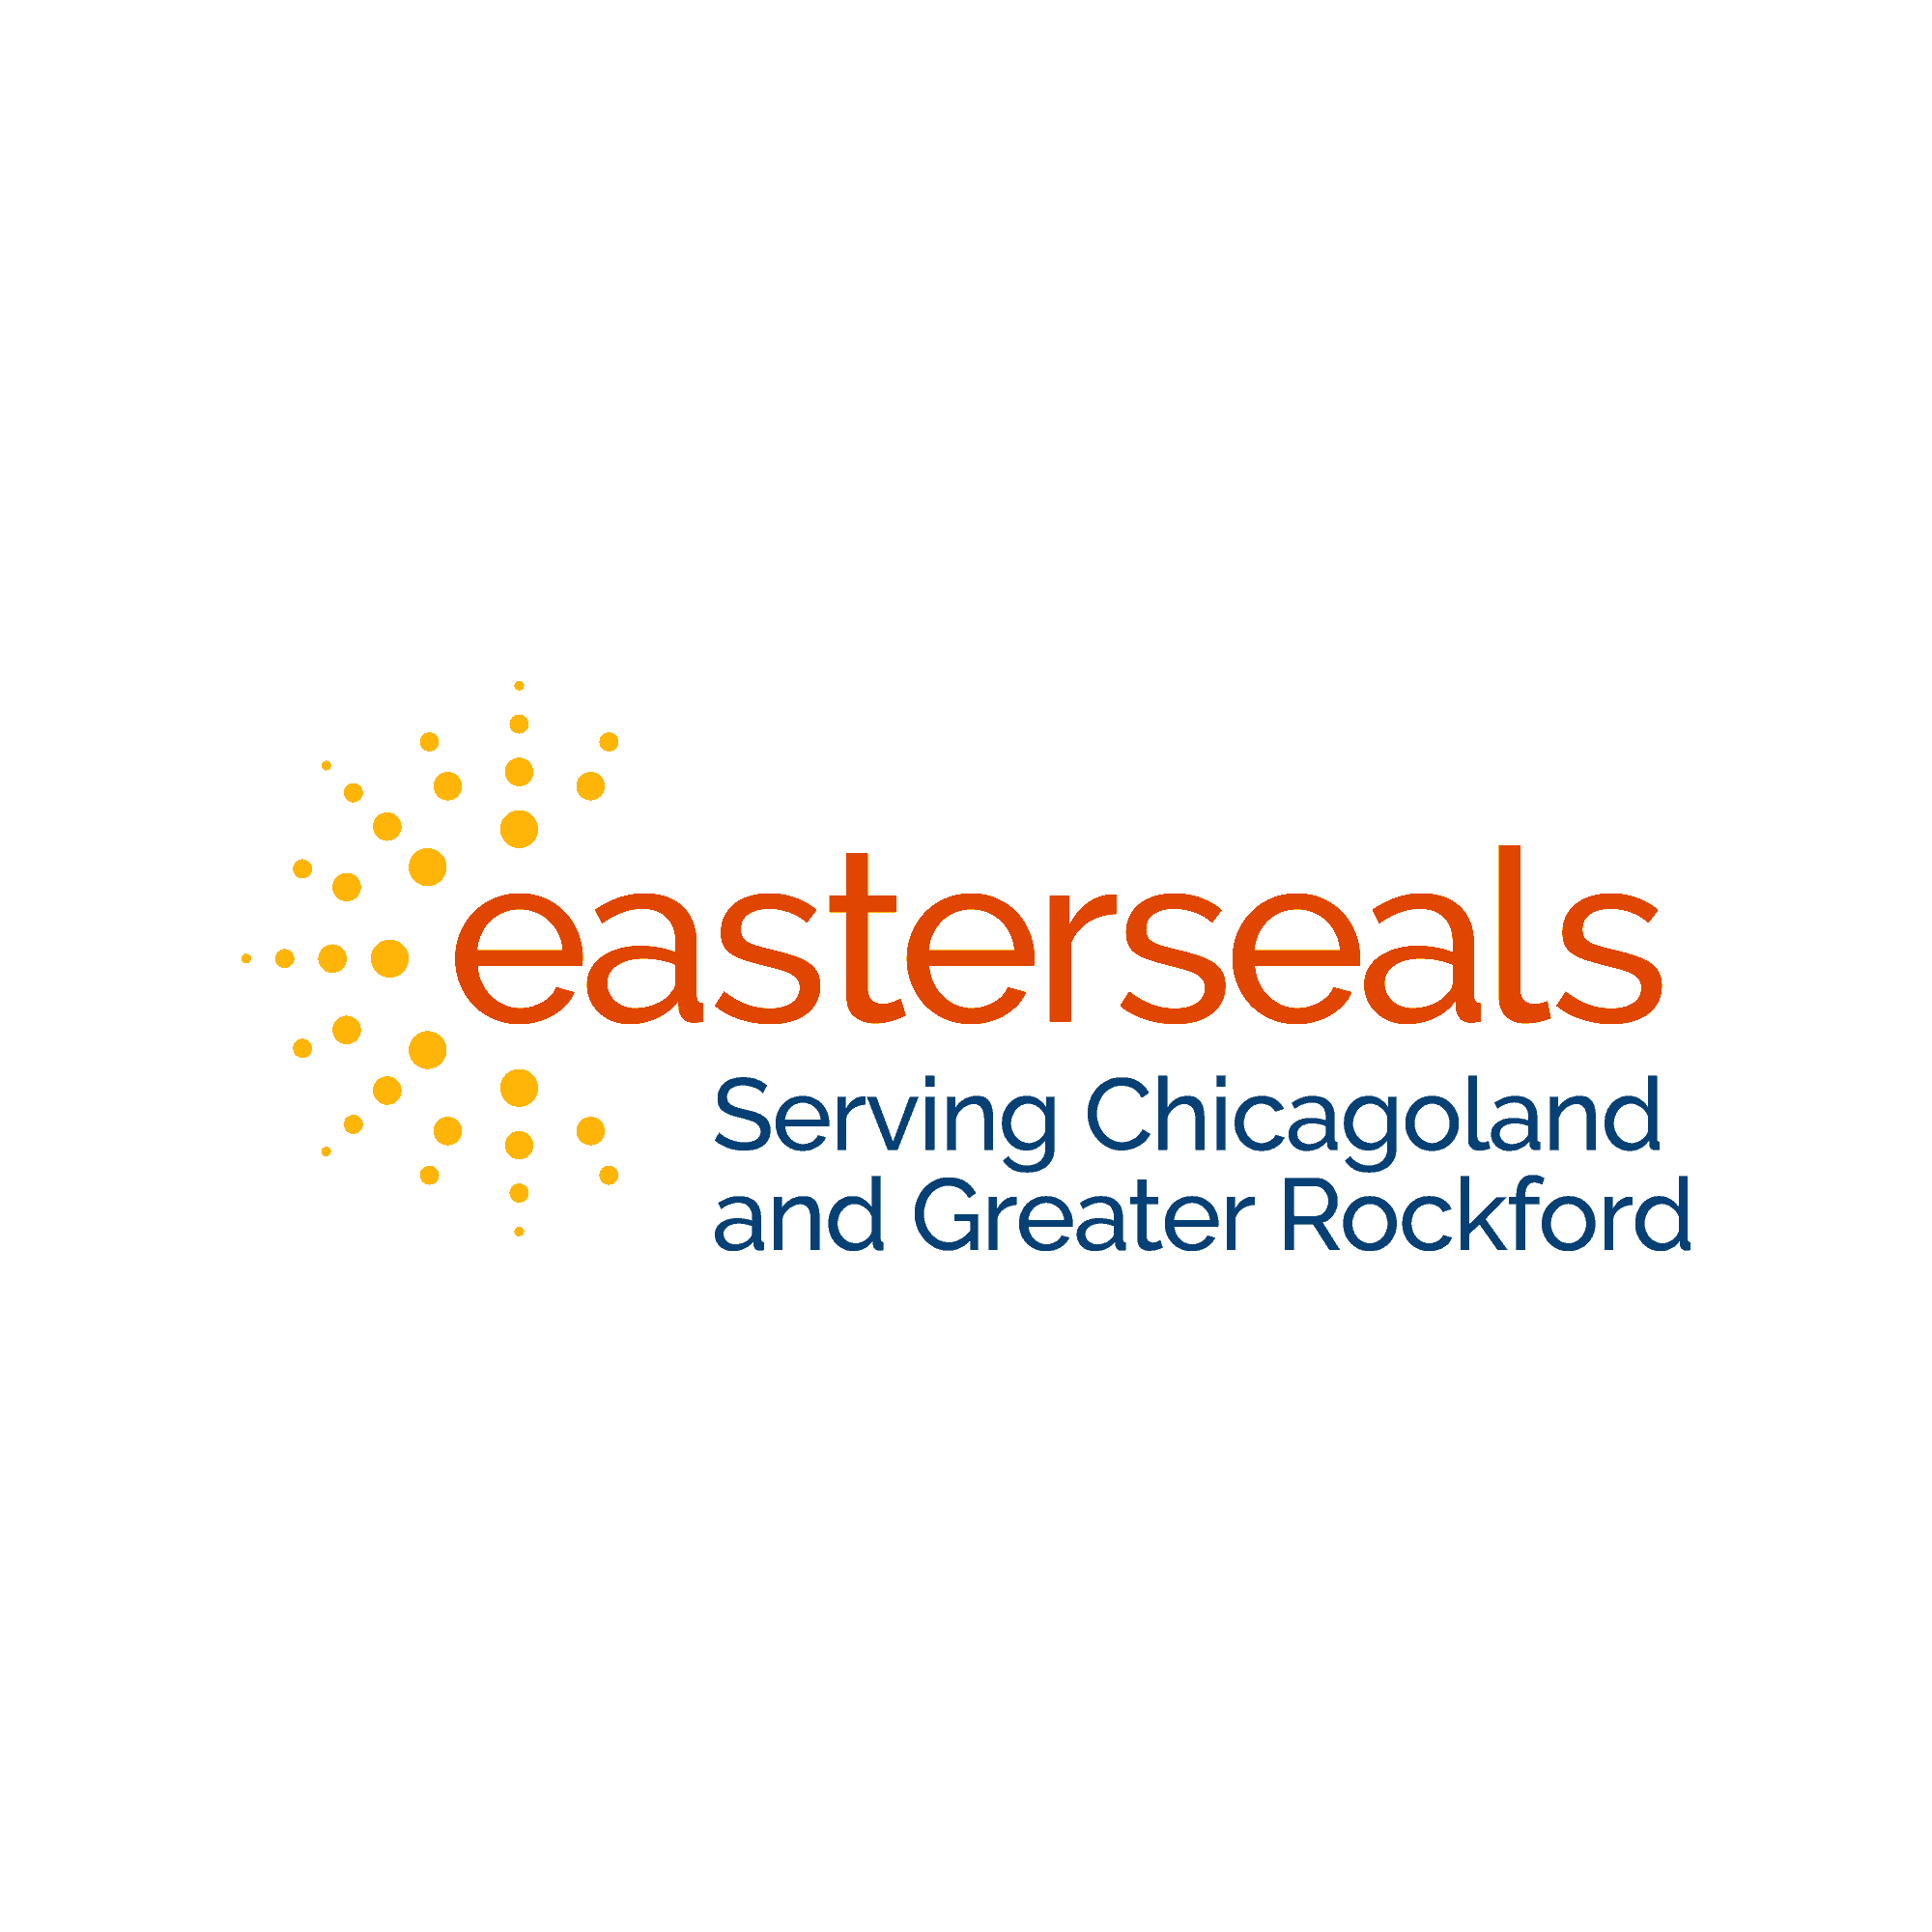 Easter seals serving chicagoland and greater rochester.